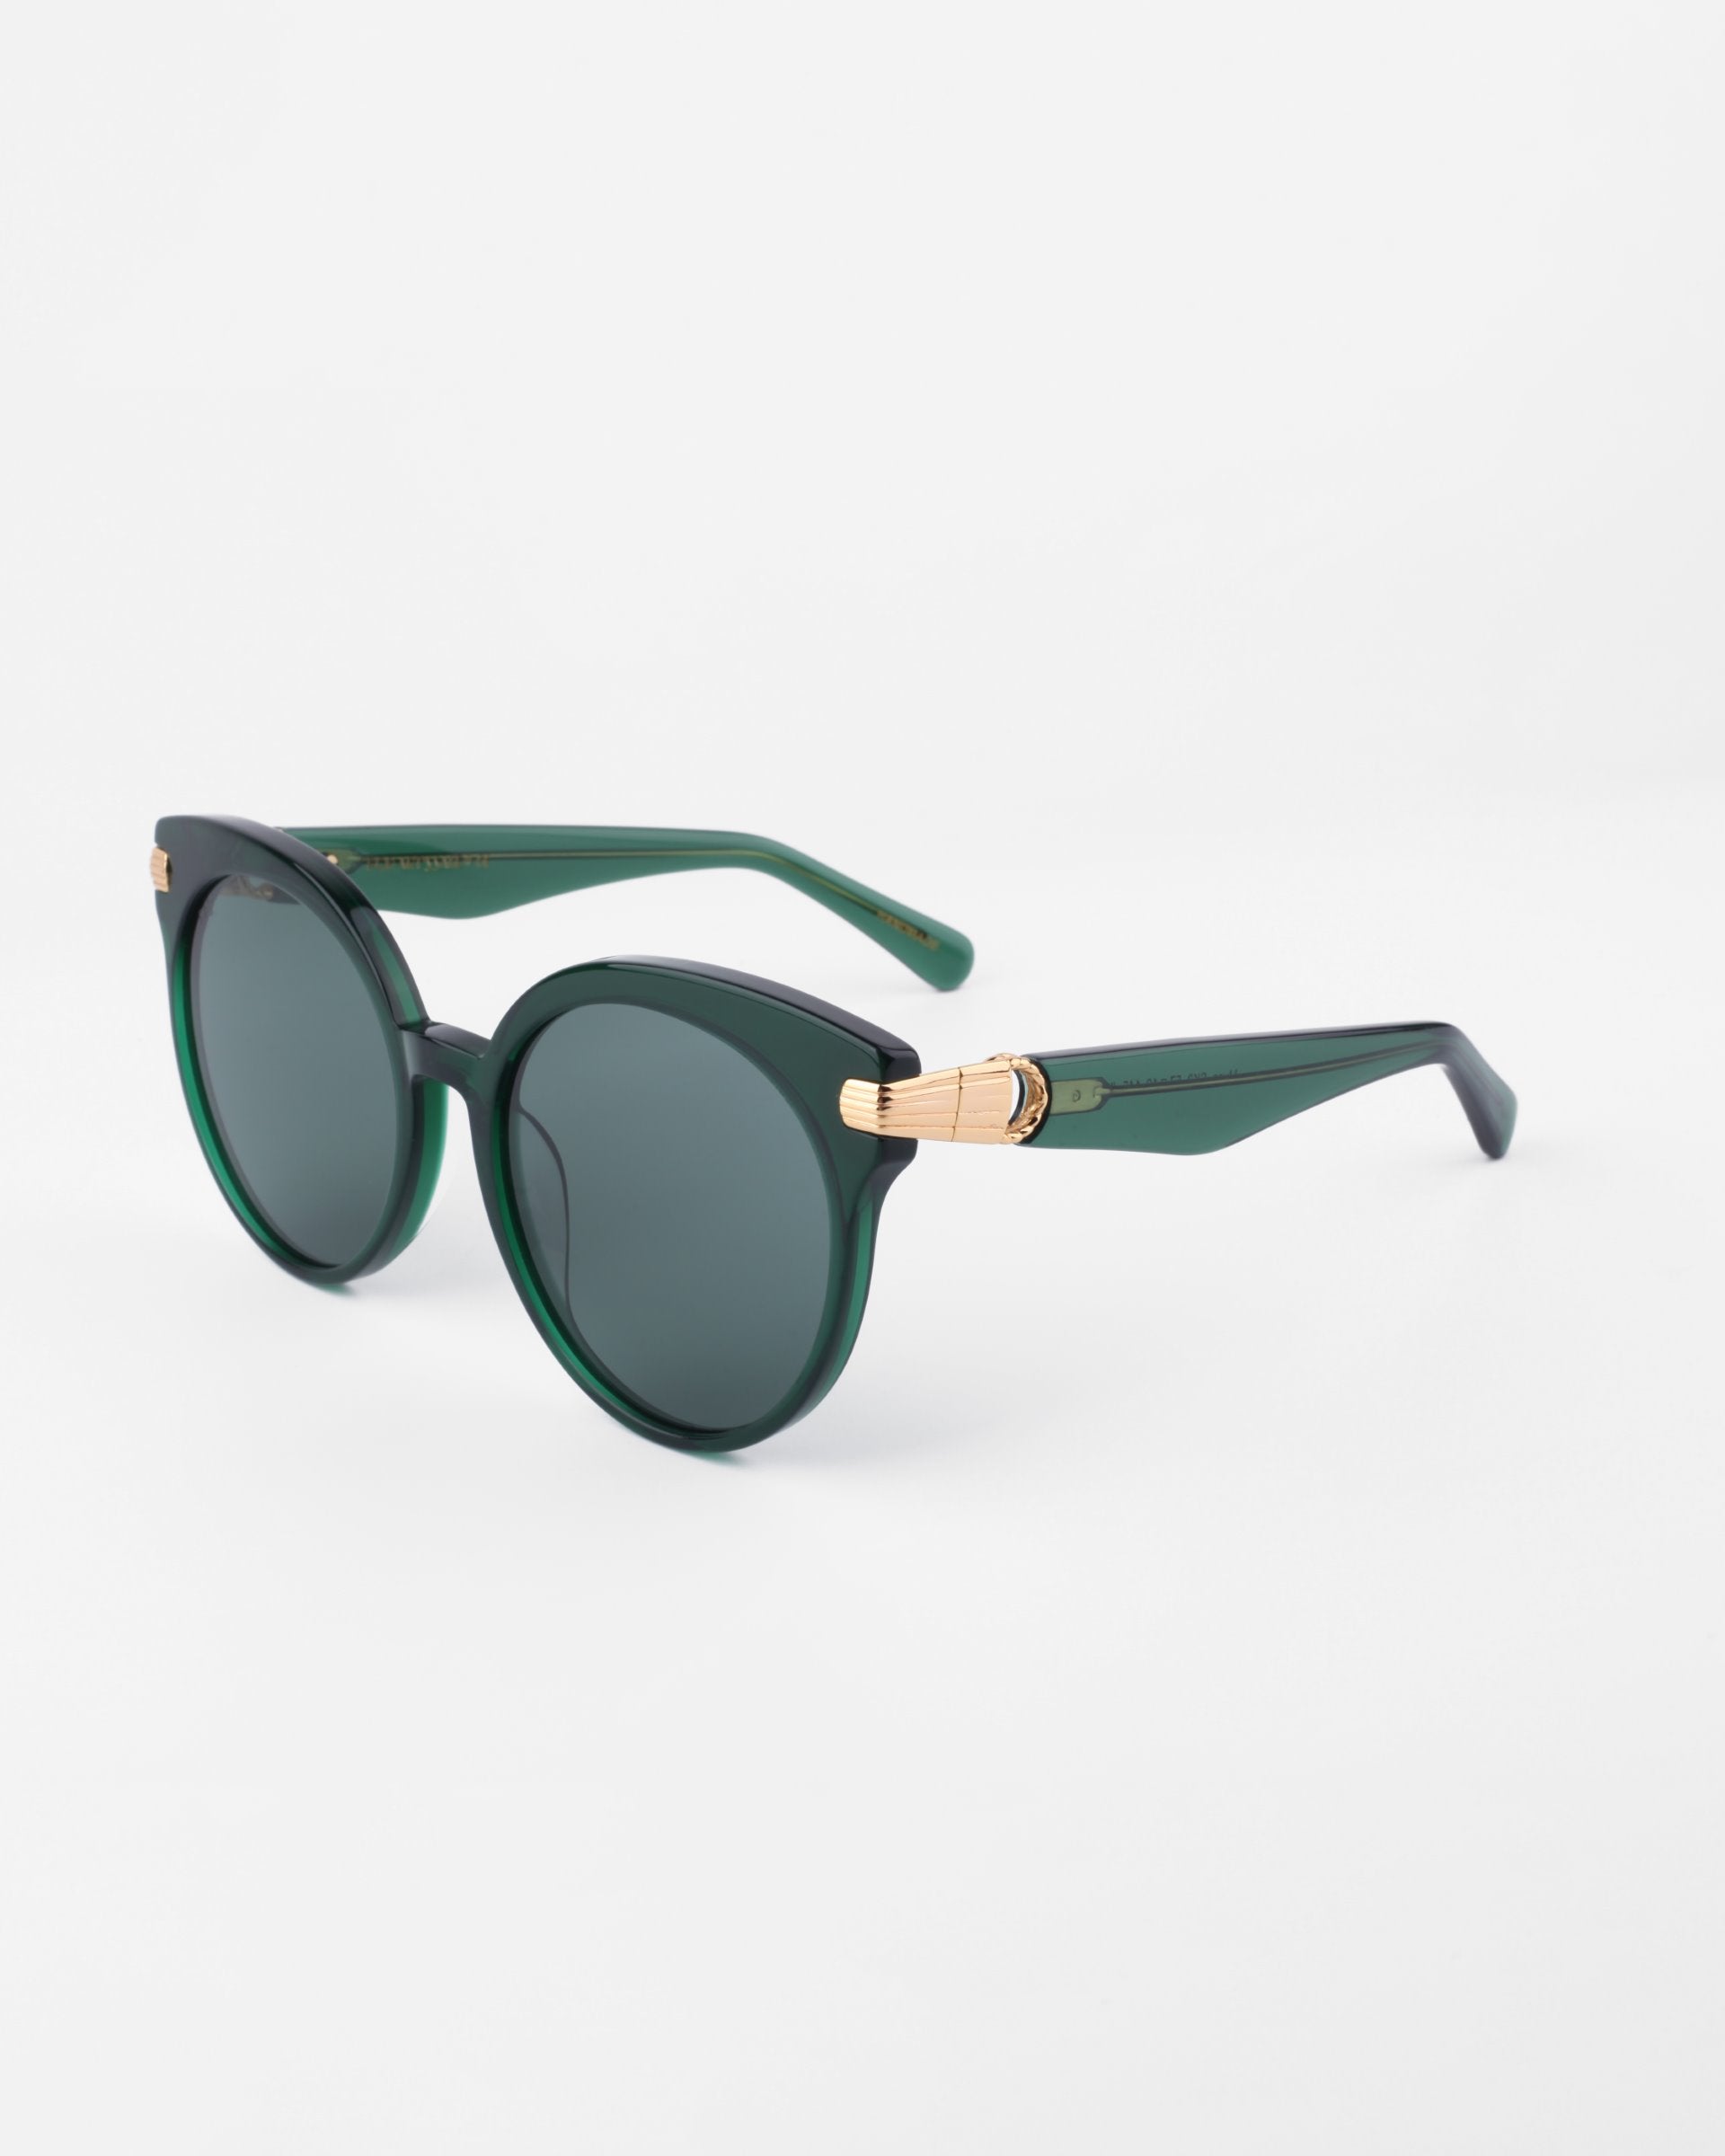 A pair of stylish Muse sunglasses by For Art&#39;s Sake® with dark green frames and shatter-resistant nylon lenses is displayed on a white background. The temples feature 18-karat gold-plated detailing near the hinges, adding a touch of elegance to the handmade plant-based acetate design.